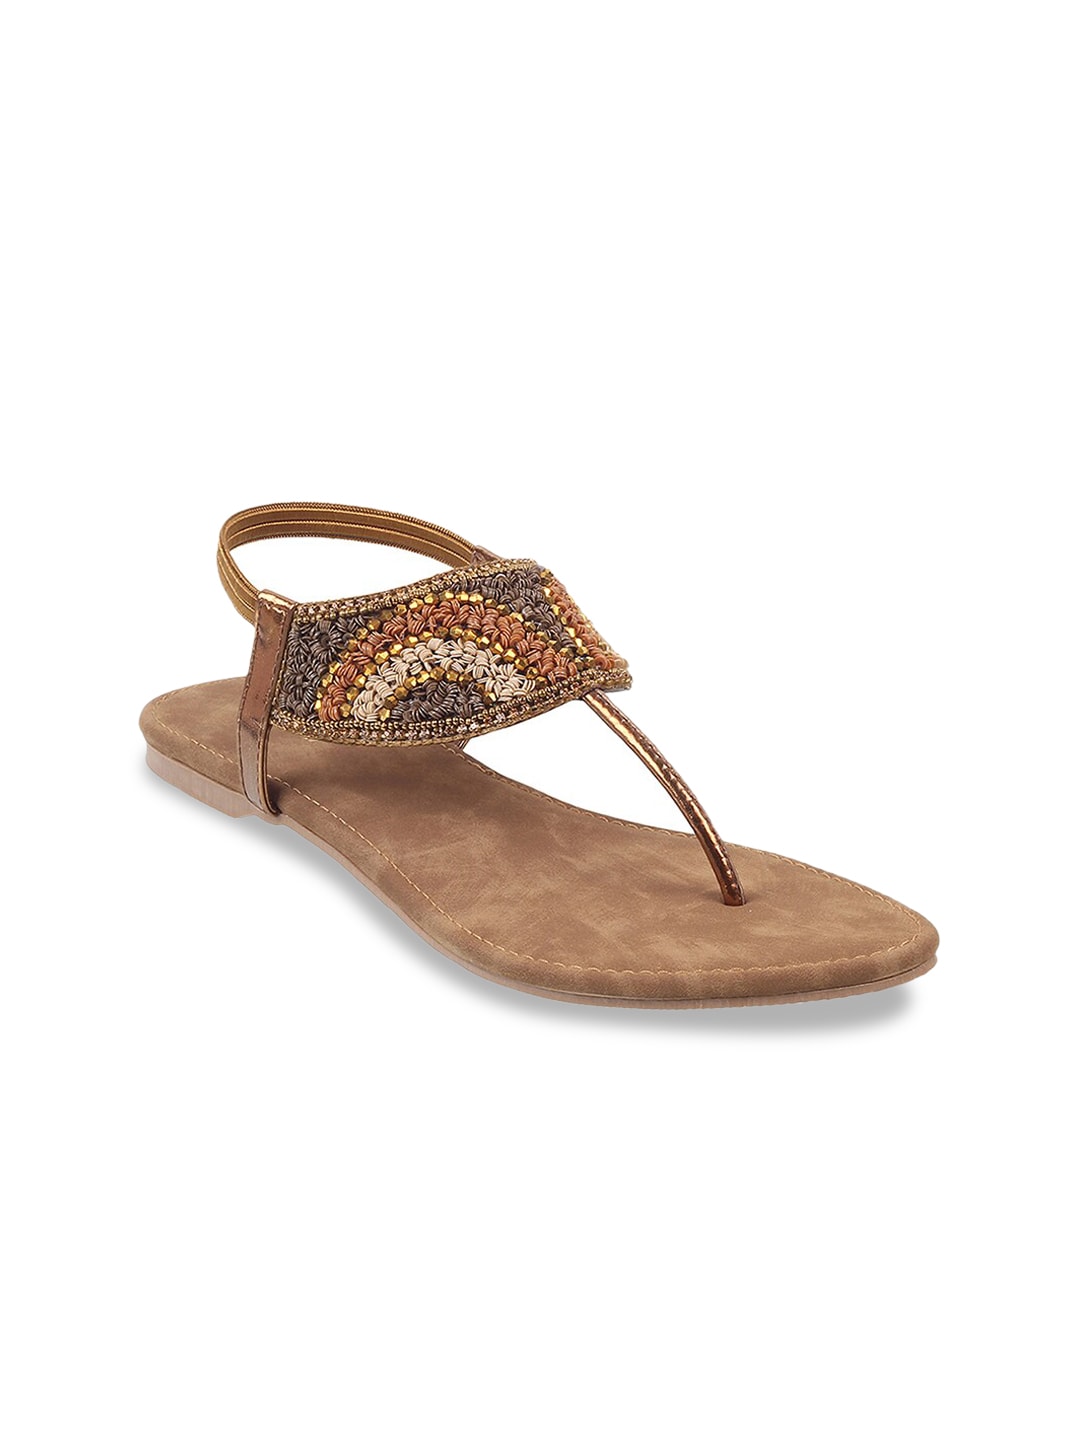 WALKWAY by Metro Women Gold-Toned Embellished T-Strap Flats Price in India